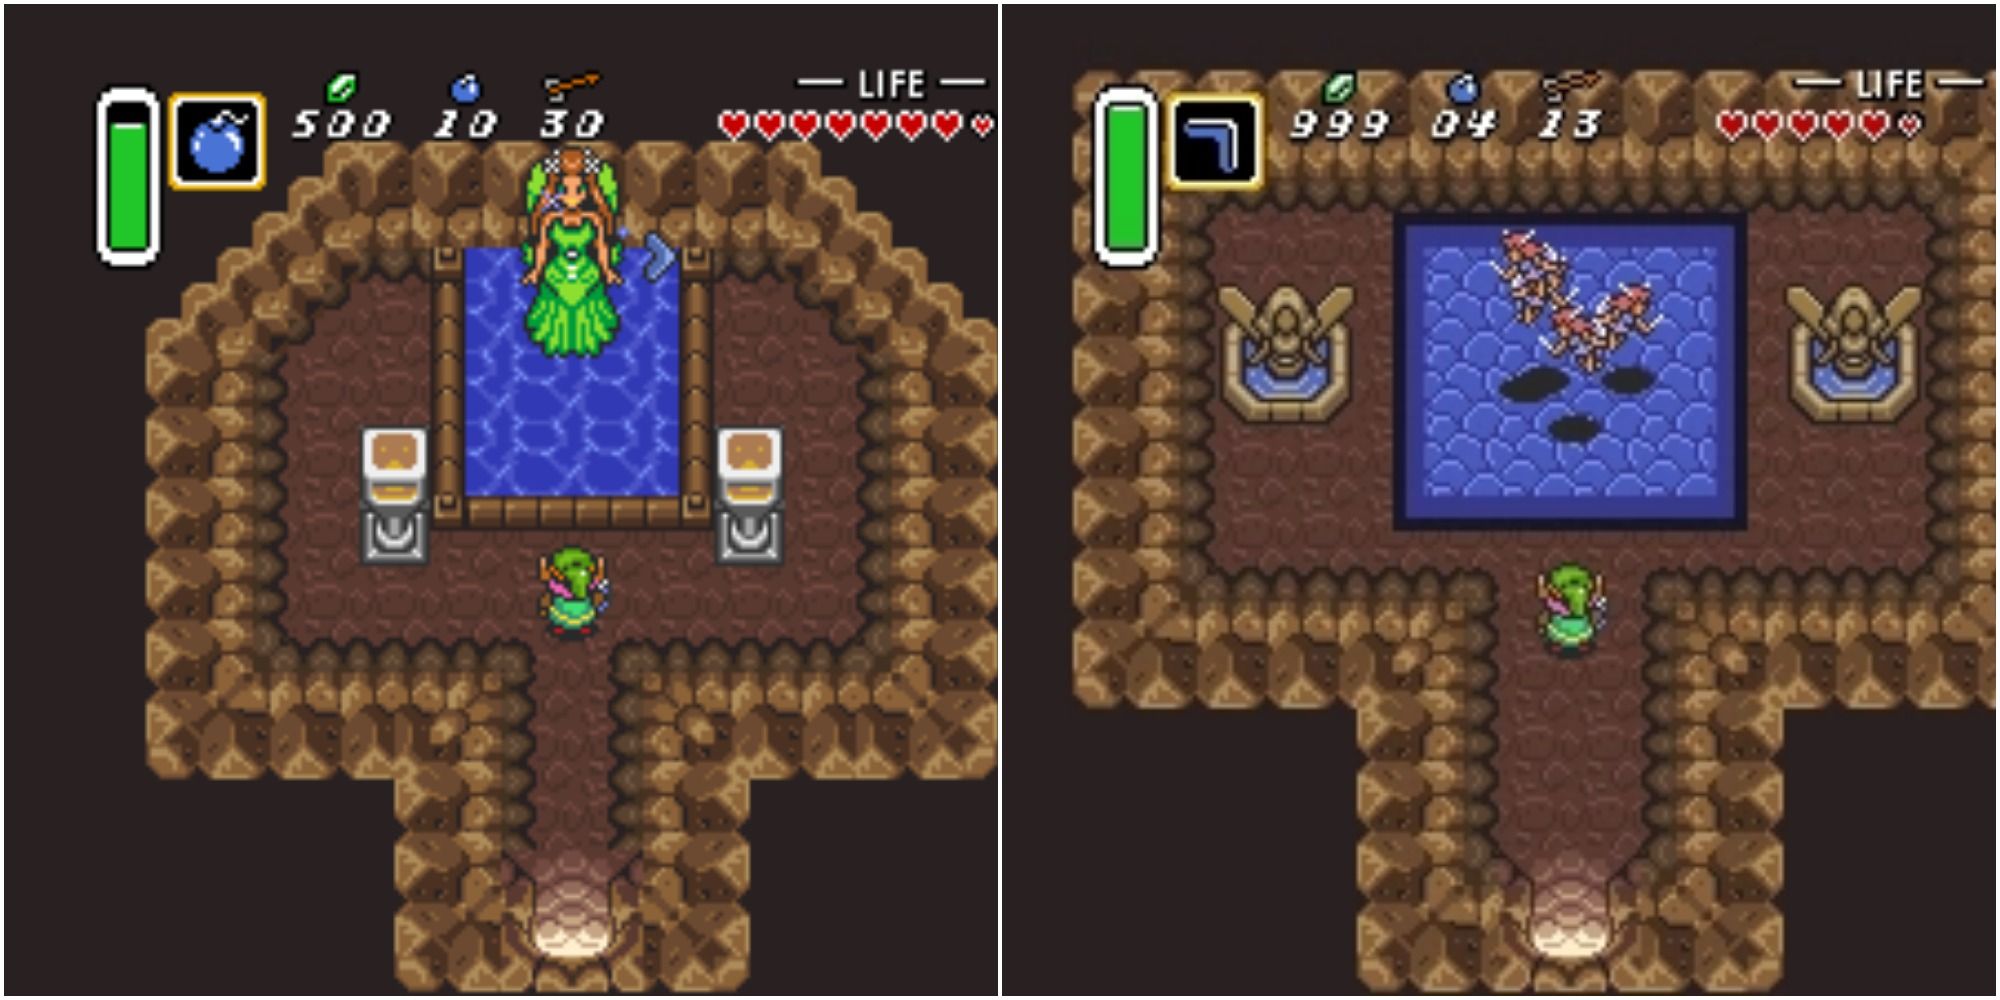 Split image screenshots of Link visiting Great Fairy Fountains in A Link to the Past.